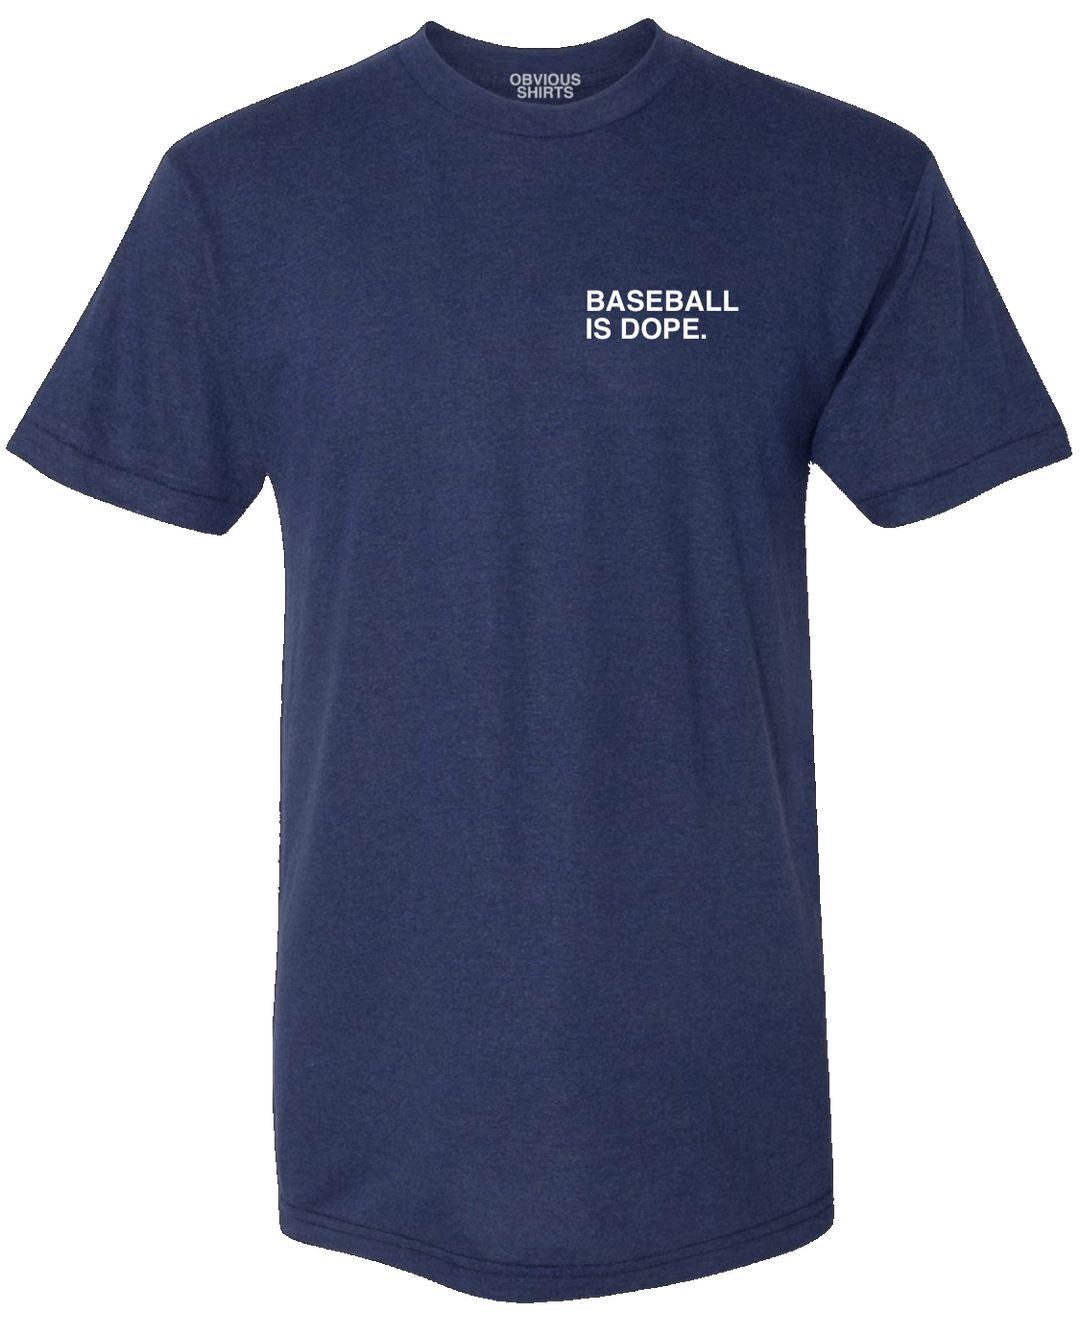 BASEBALL IS DOPE. - OBVIOUS SHIRTS.